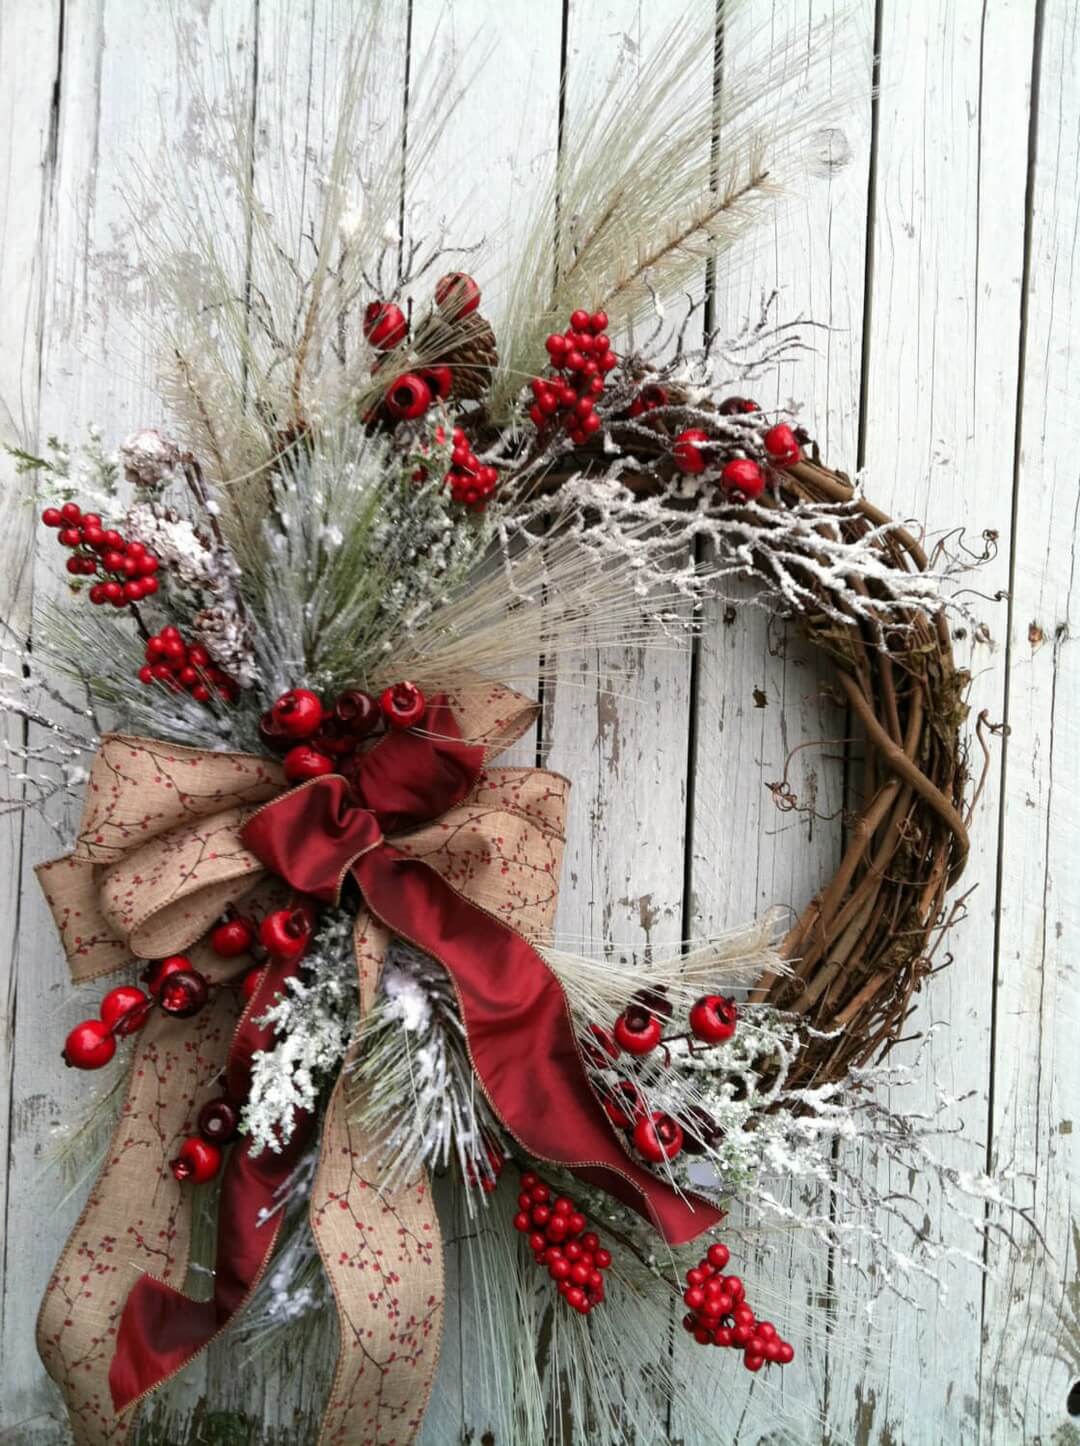 Thinking of making your own Christmas wreaths? You're going to love these fun and creative Christmas wreaths ideas! They're simple and easy to make and don't cost too much. #christmaswreaths #christmasdecor #christmascrafts #christmasdiys #christmas #holidays 